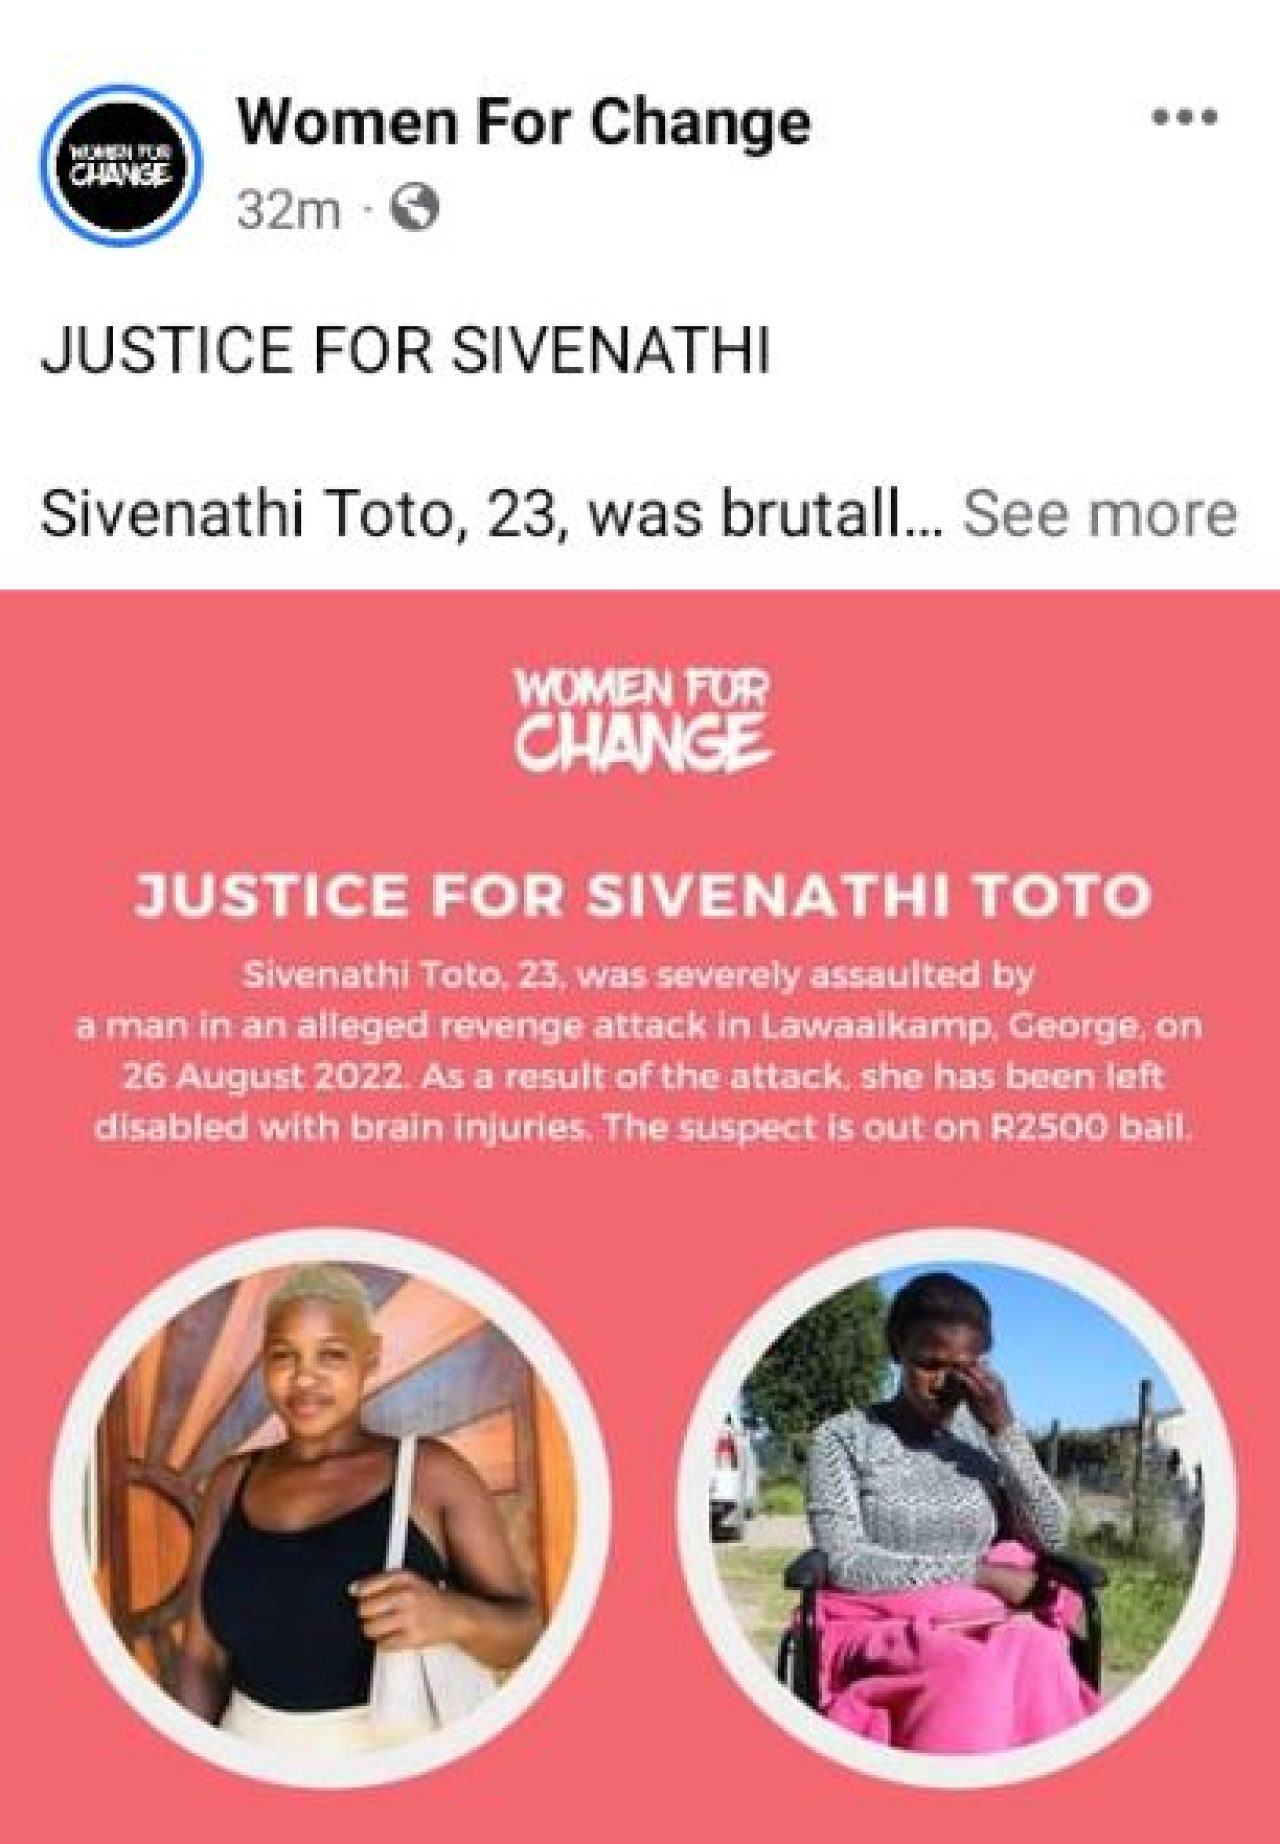 23-year-old Sivenathi Toto, left paralyzed and brain damaged after brutal attack by her boyfriend's rival. AdvertAfrica News on afronewswire.com: Amplifying Africa's Voice | afronewswire.com | Breaking News & Stories